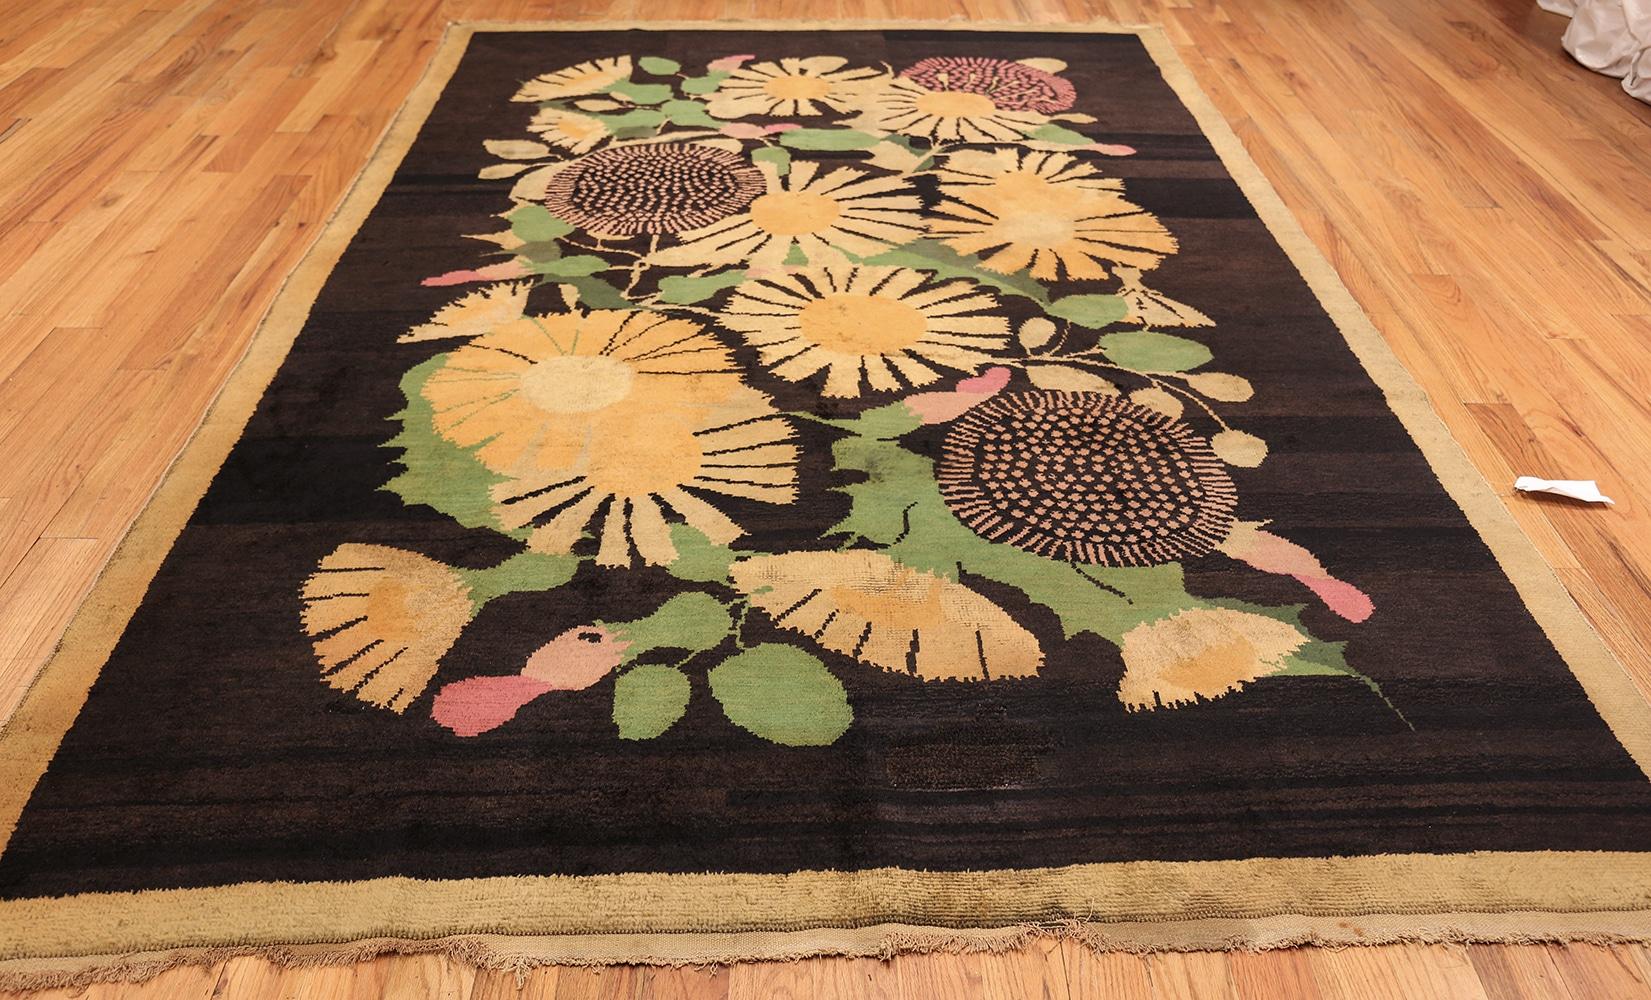 Antique French Art Deco Rug. Size: 6 ft 6 in x 9 ft 10 in (1.98 m x 3 m) 1